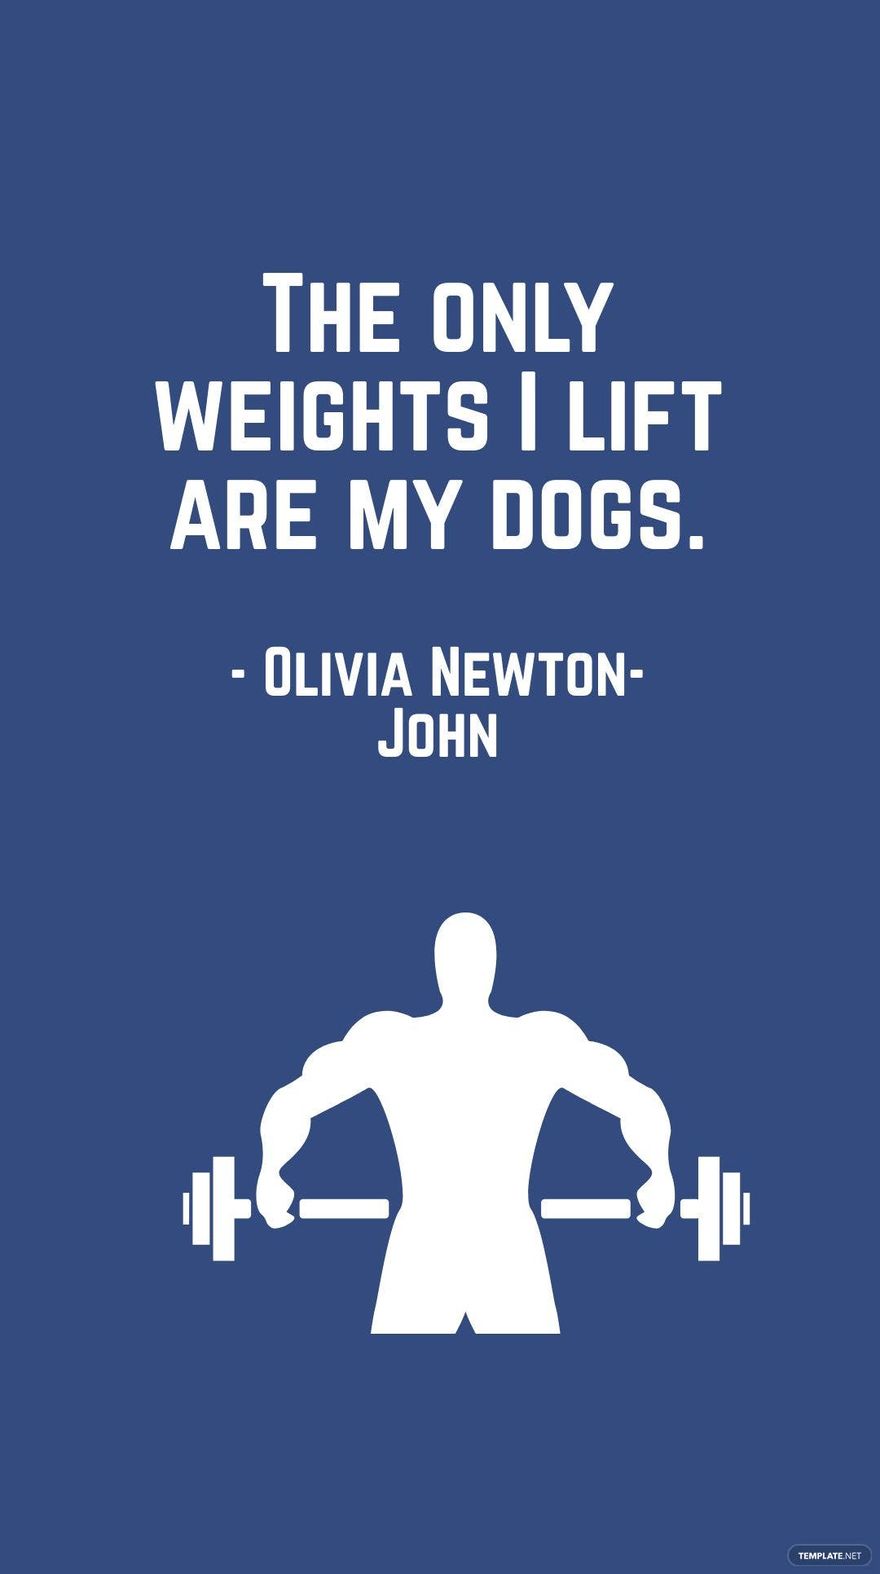 Free Olivia Newton-John - The only weights I lift are my dogs. in JPG